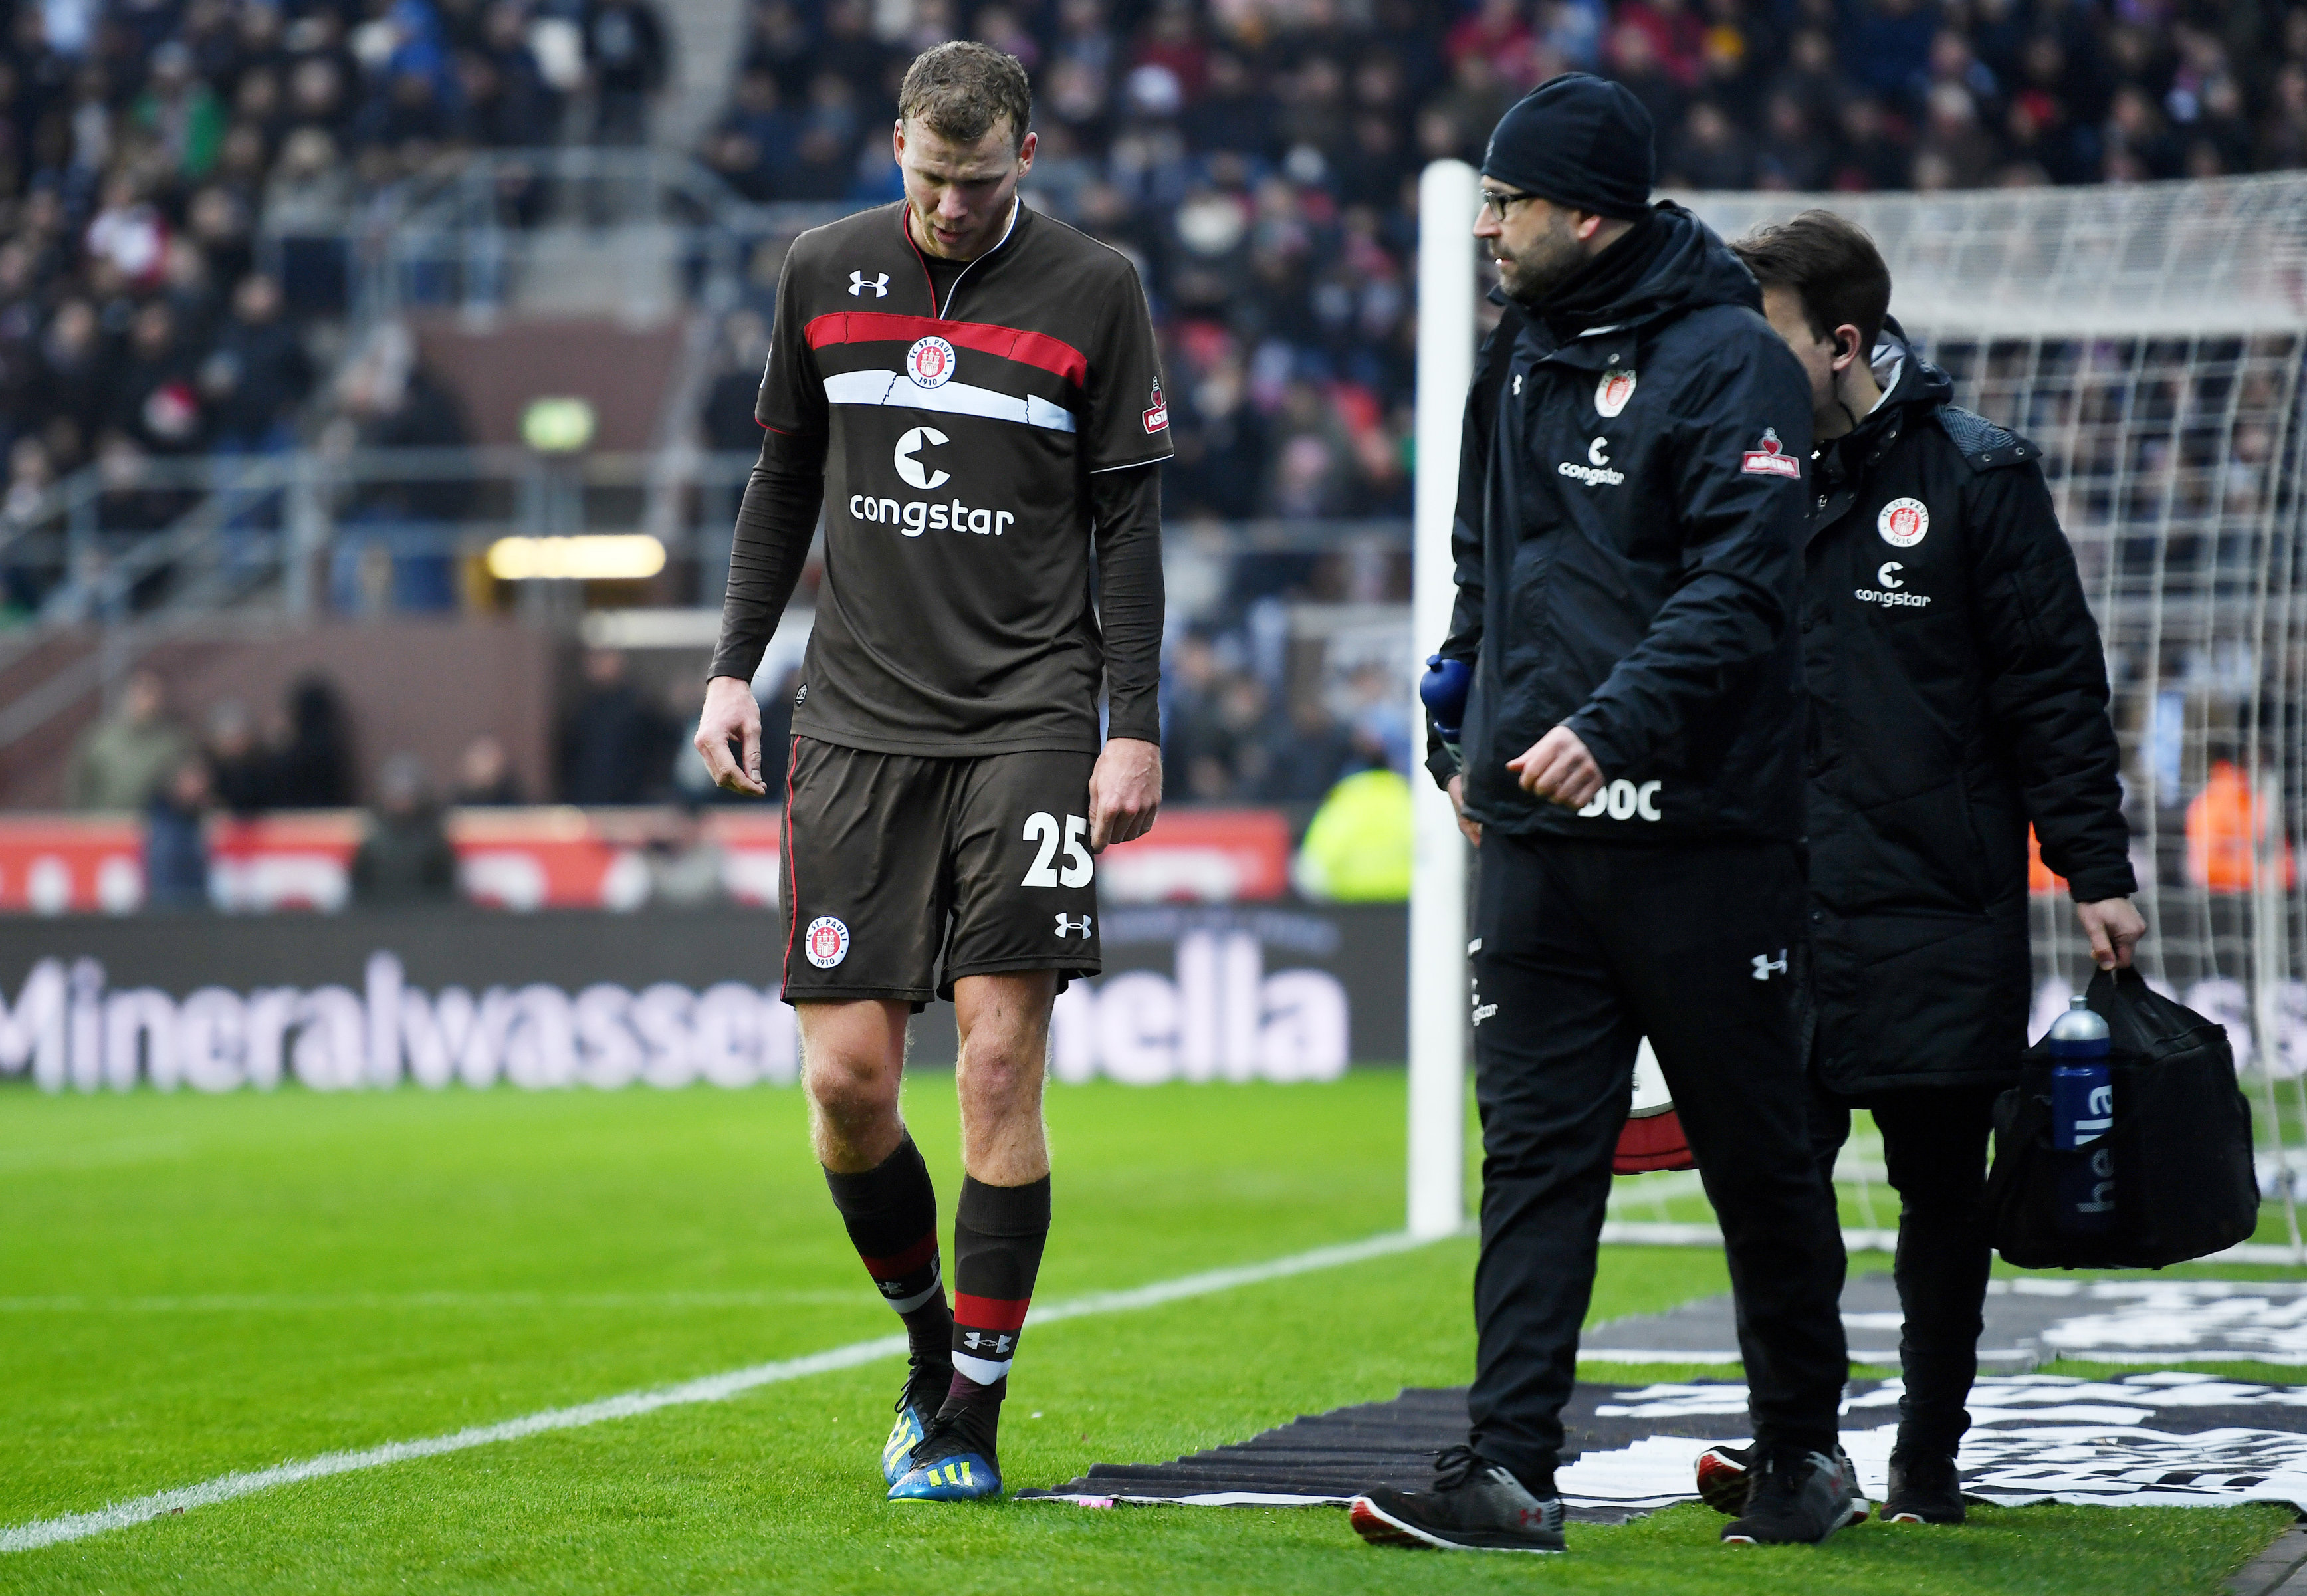 Henk Veerman makes his way off the pitch, accompanied by club doctor Sebastian Schneider and physiotherapist Mike Muretic.